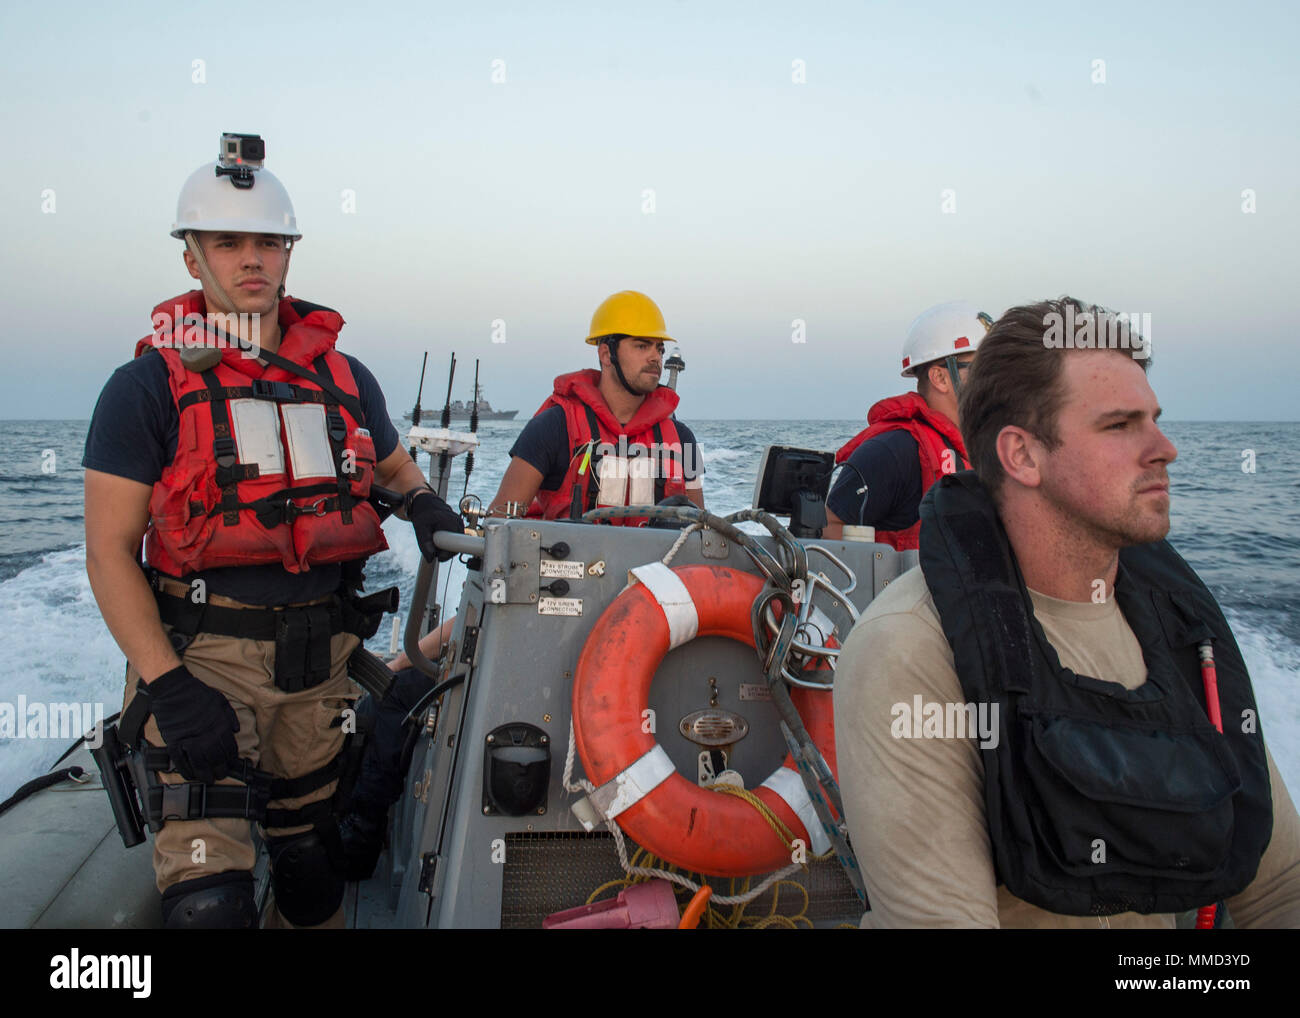 171016-N-AX638-0511   5TH FLEET AREA OF OPERATIONS (Oct. 16, 2017) Sailors assigned to the Arleigh Burke-class guided-missile destroyer USS Howard (DDG 83) transit in a rigid-hull inflatable boat en route to rescue a sea turtle entangled on a semi-sunken fishing vessel. Howard is deployed in the 5th Fleet area of operations conducting maritime security operations to reassure allies and partners, preserving freedom of navigation and maintaining the free flow of commerce. (U.S. Navy photo by Mass Communication Specialist 2nd Class Tyler Preston/Released) Stock Photo